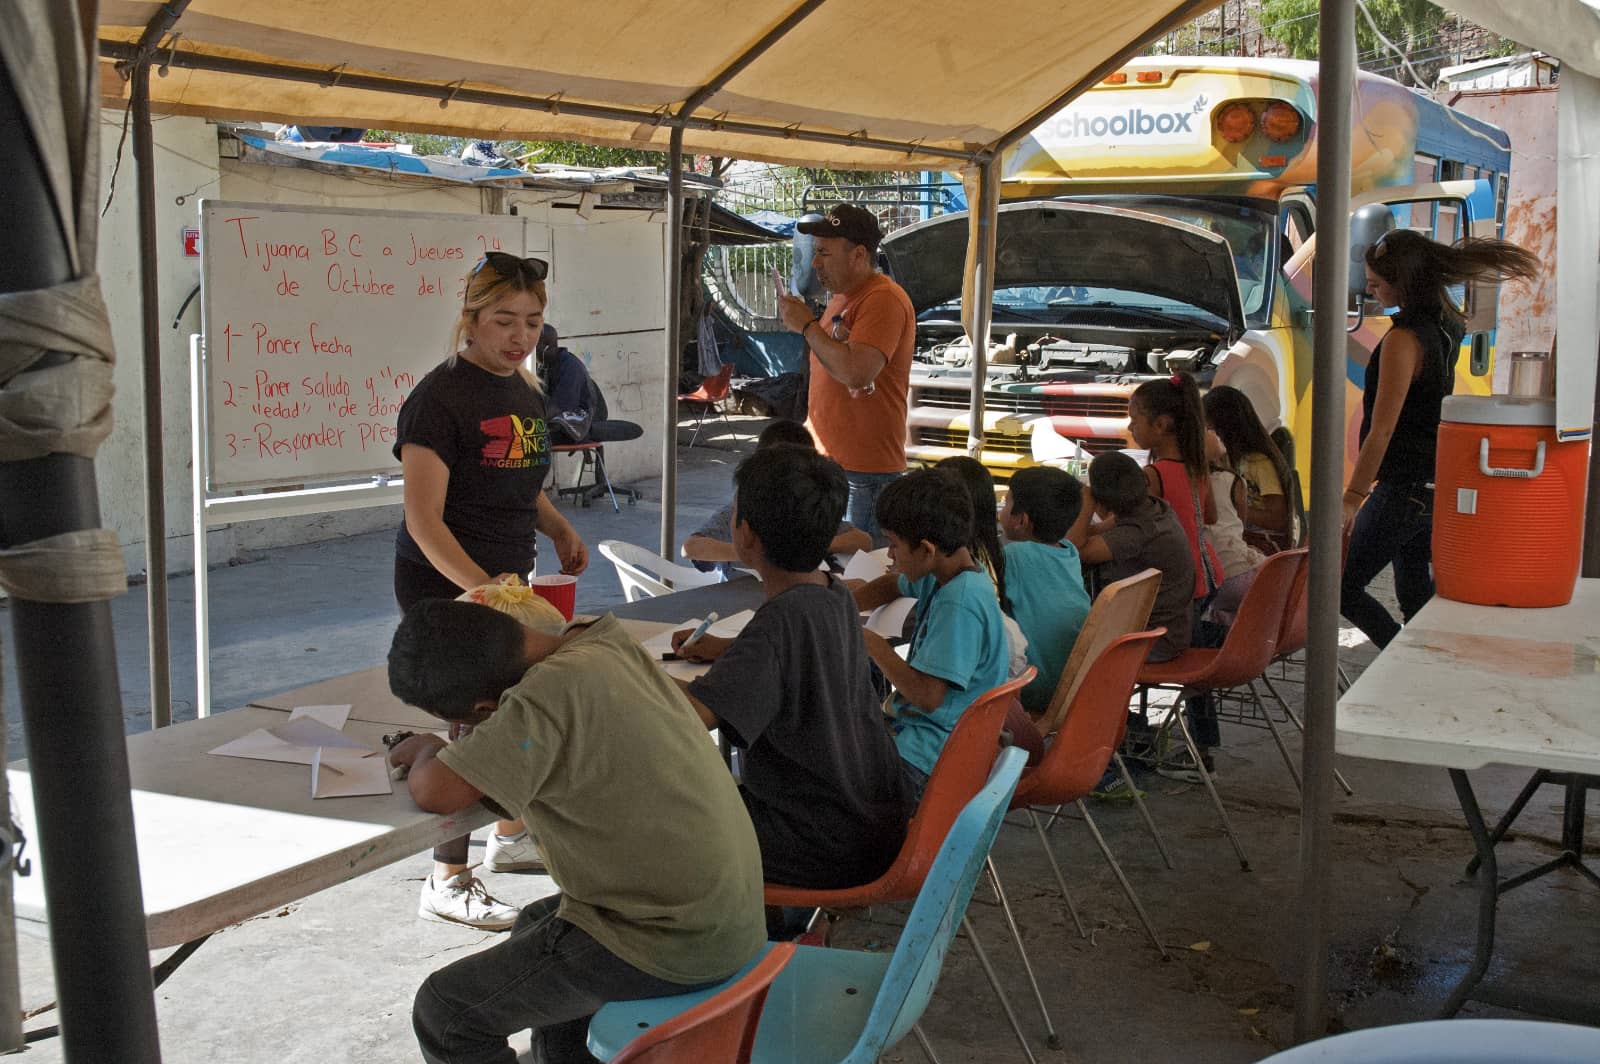 Photograph by Tish Lampert showing children taking a class in a makeshift classroom